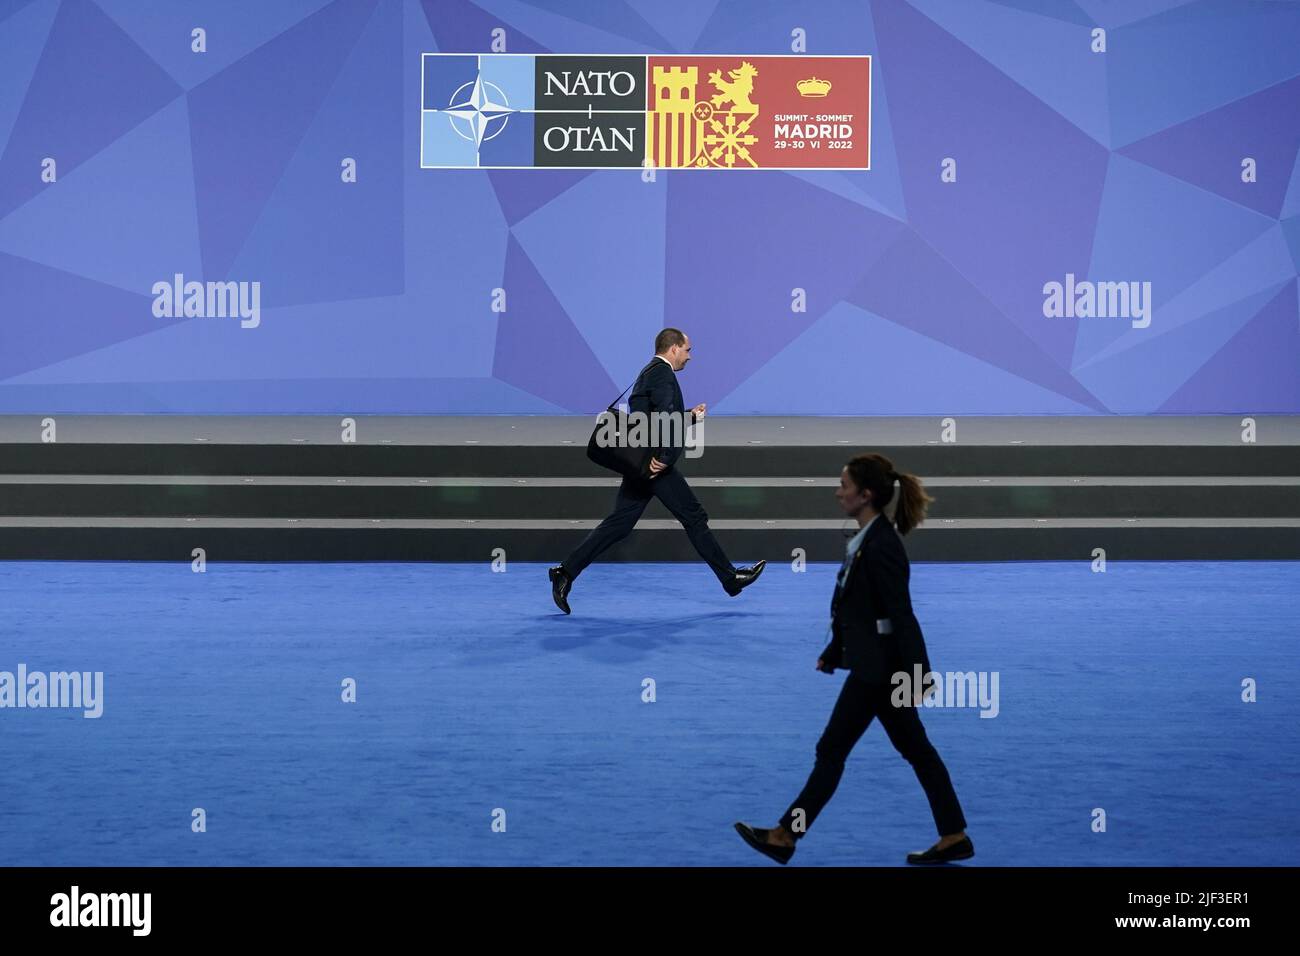 Madrid, Spain. 29th June, 2022. A delegate dashes to a meeting as NATO heads of state and governments hold a NATO summit in Madrid, Spain, Wednesday, June 29, 2022. Photo by Paul Hanna/UPI Credit: UPI/Alamy Live News Stock Photo